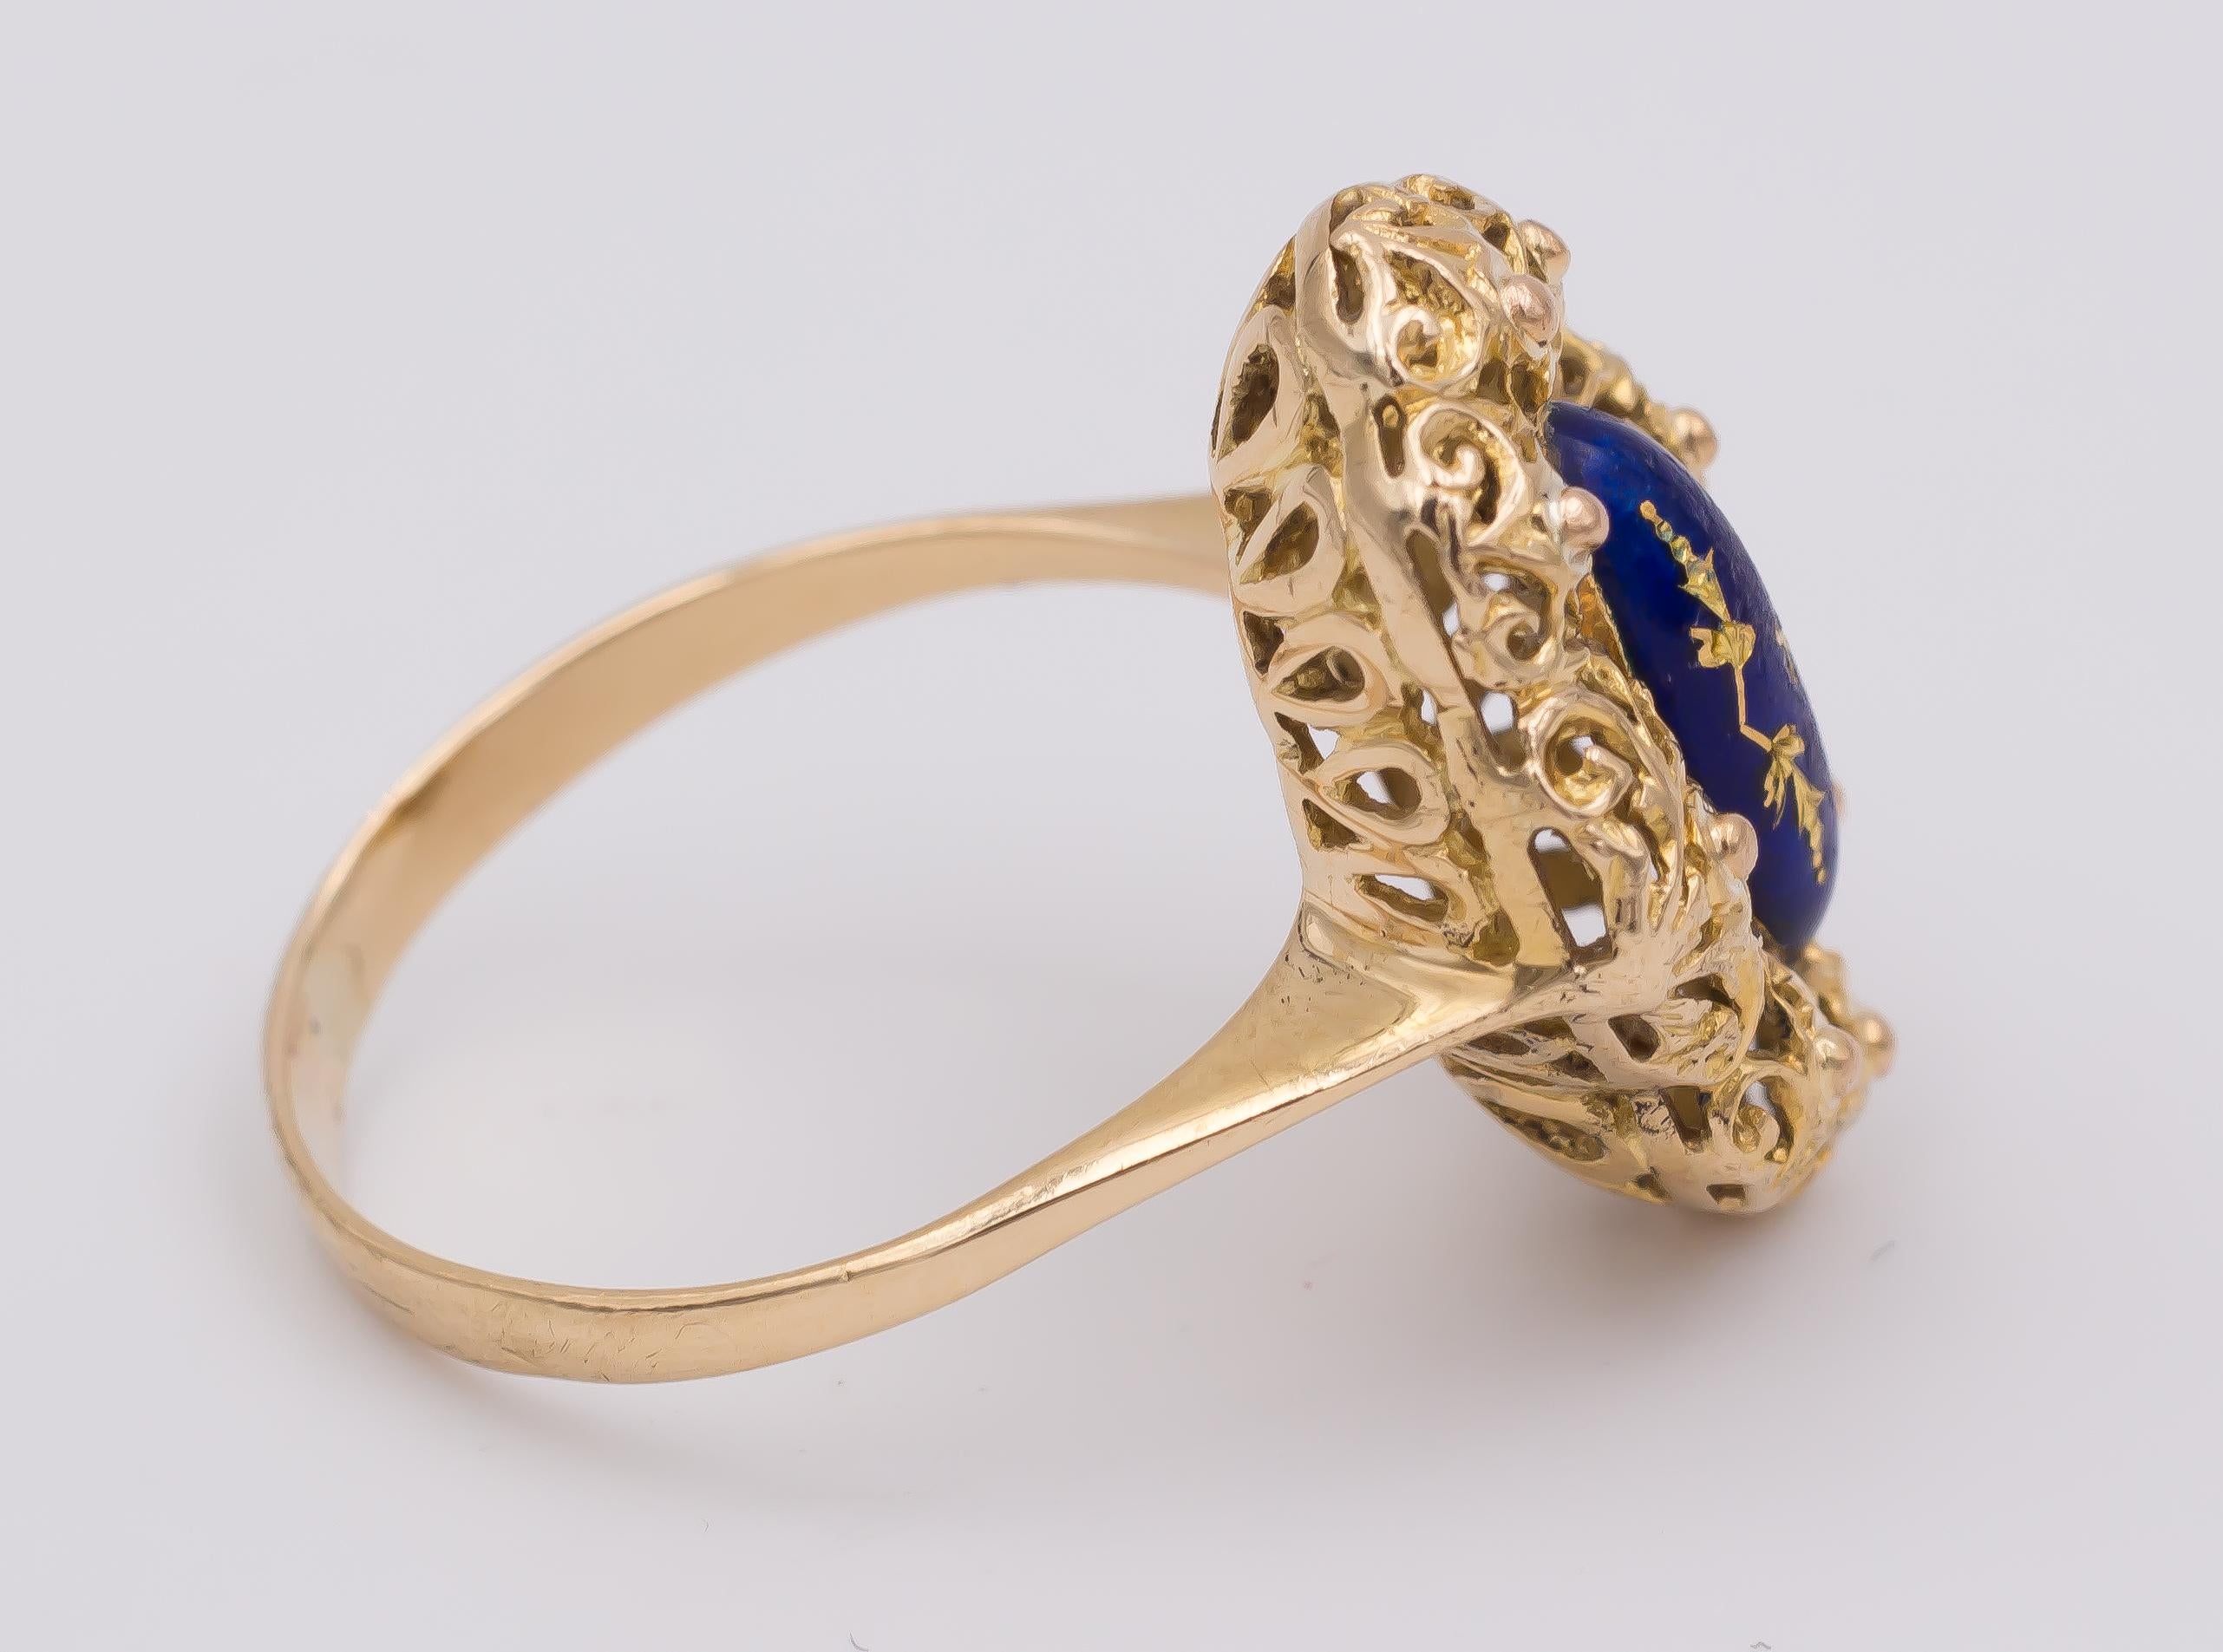 Antique 18 Karat Gold and Enamel Ring, 1940s In Good Condition For Sale In Bologna, IT